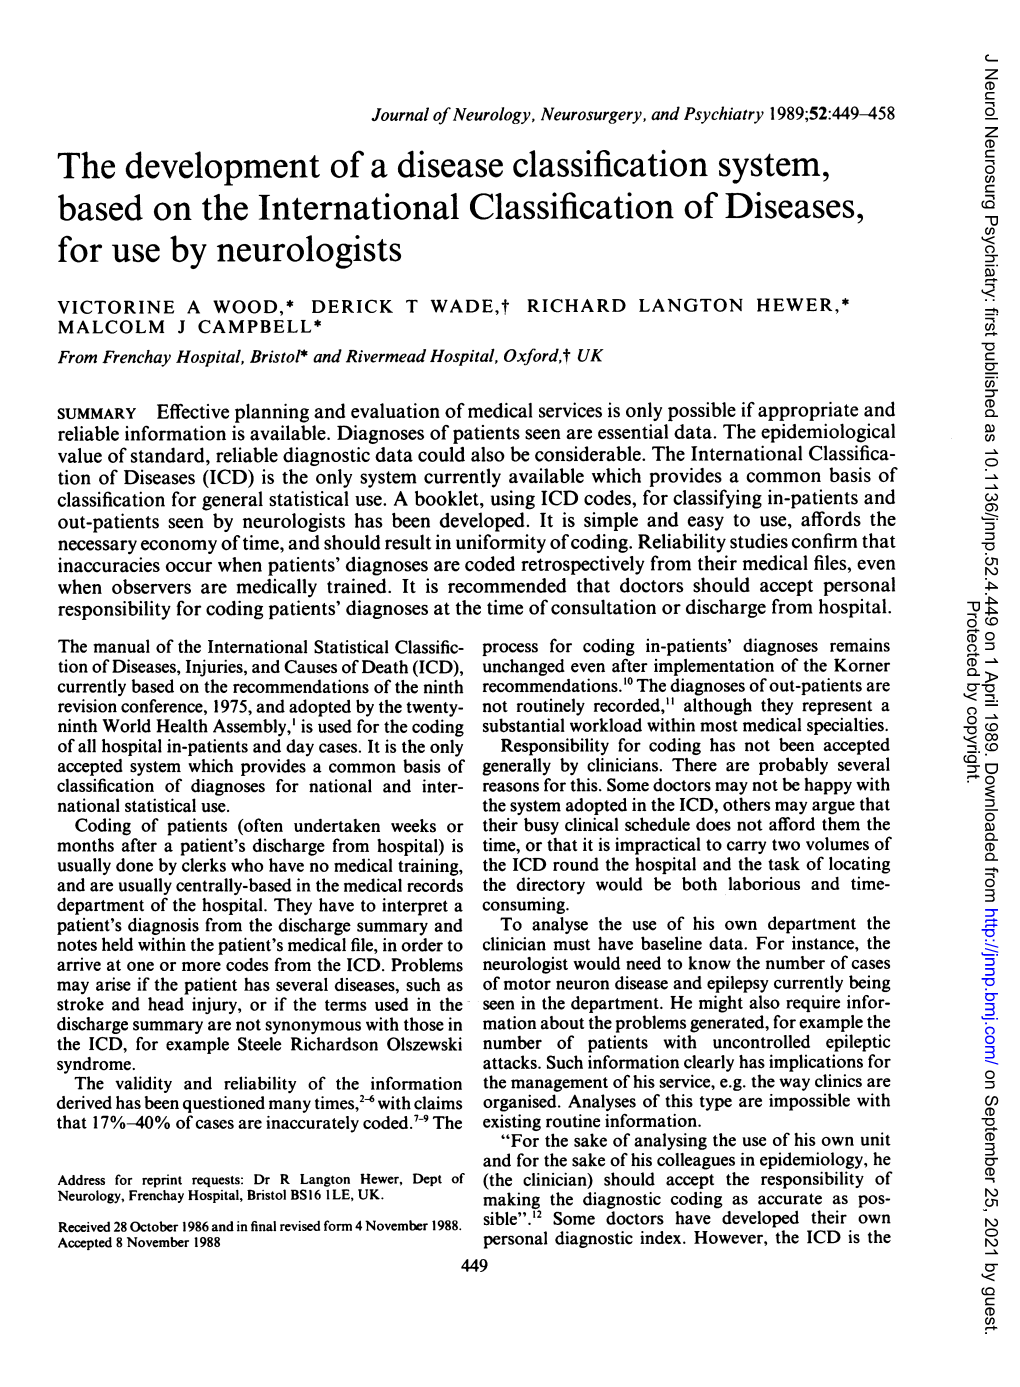 The Development of a Disease Classification System, Based on the International Classification of Diseases, for Use by Neurologists